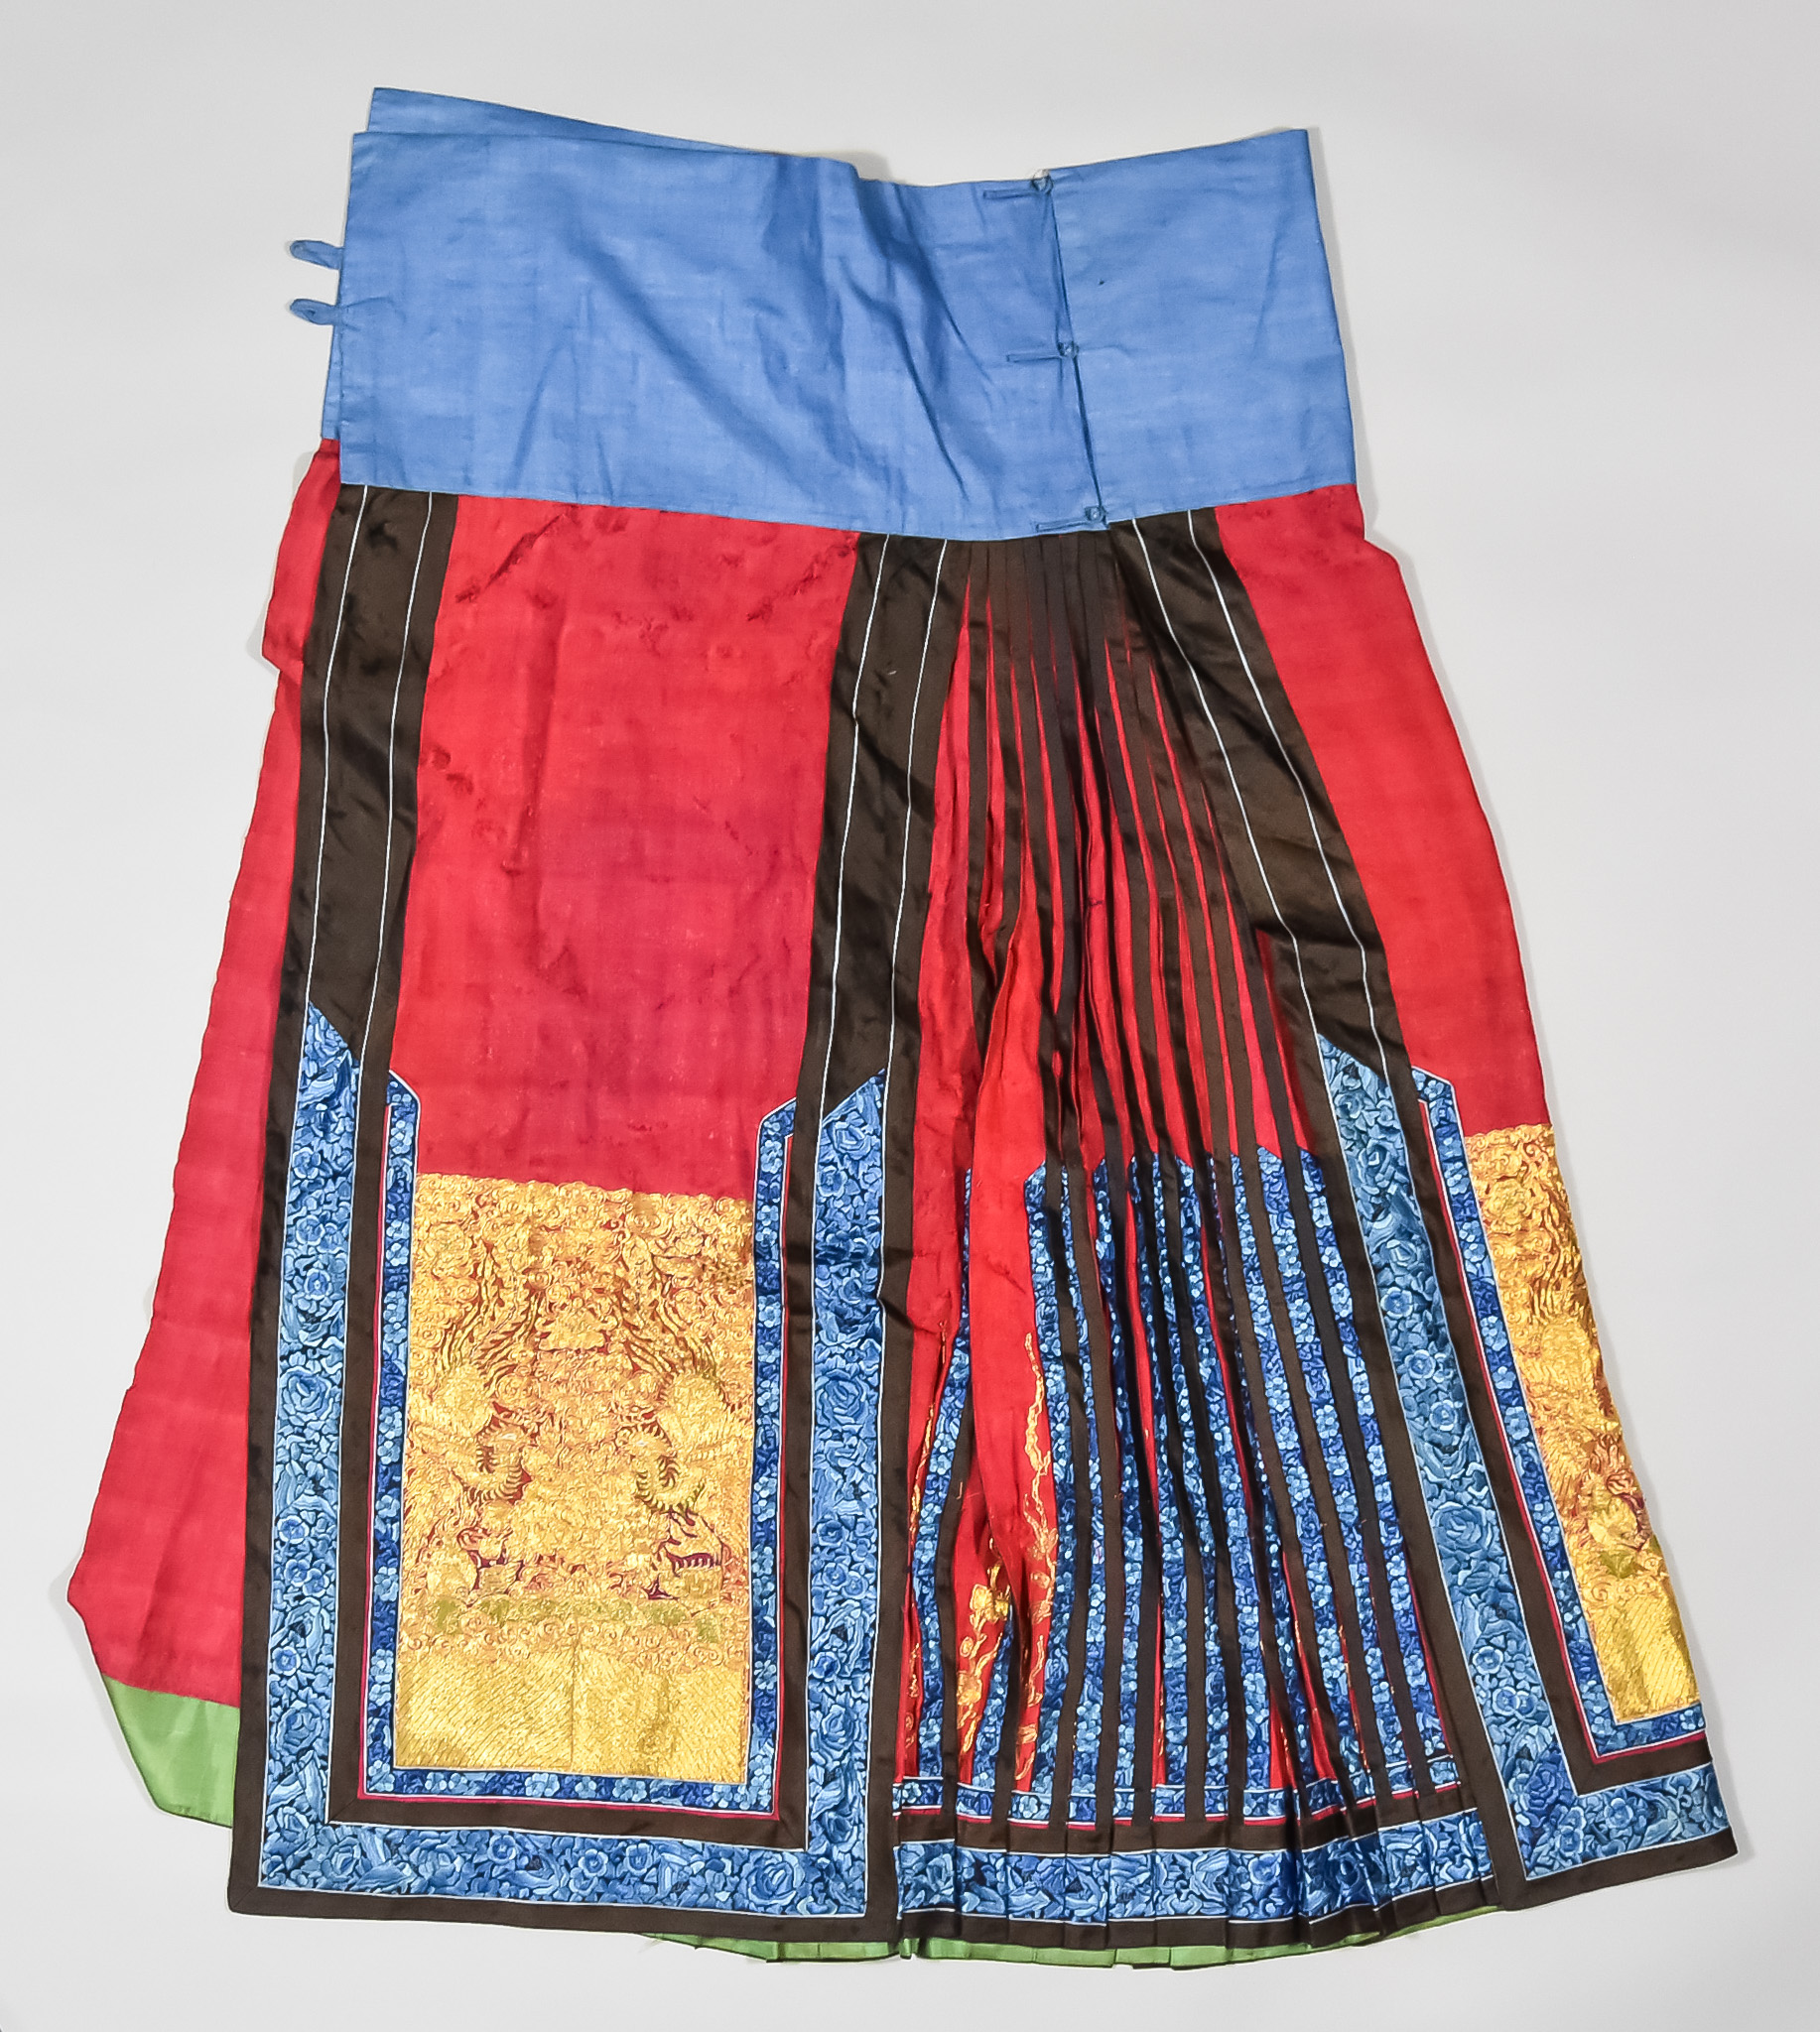 Two Chinese Silk Embroidered Skirts, Late 19th/Early 20th Century, one in soft yellow worked in - Image 2 of 2